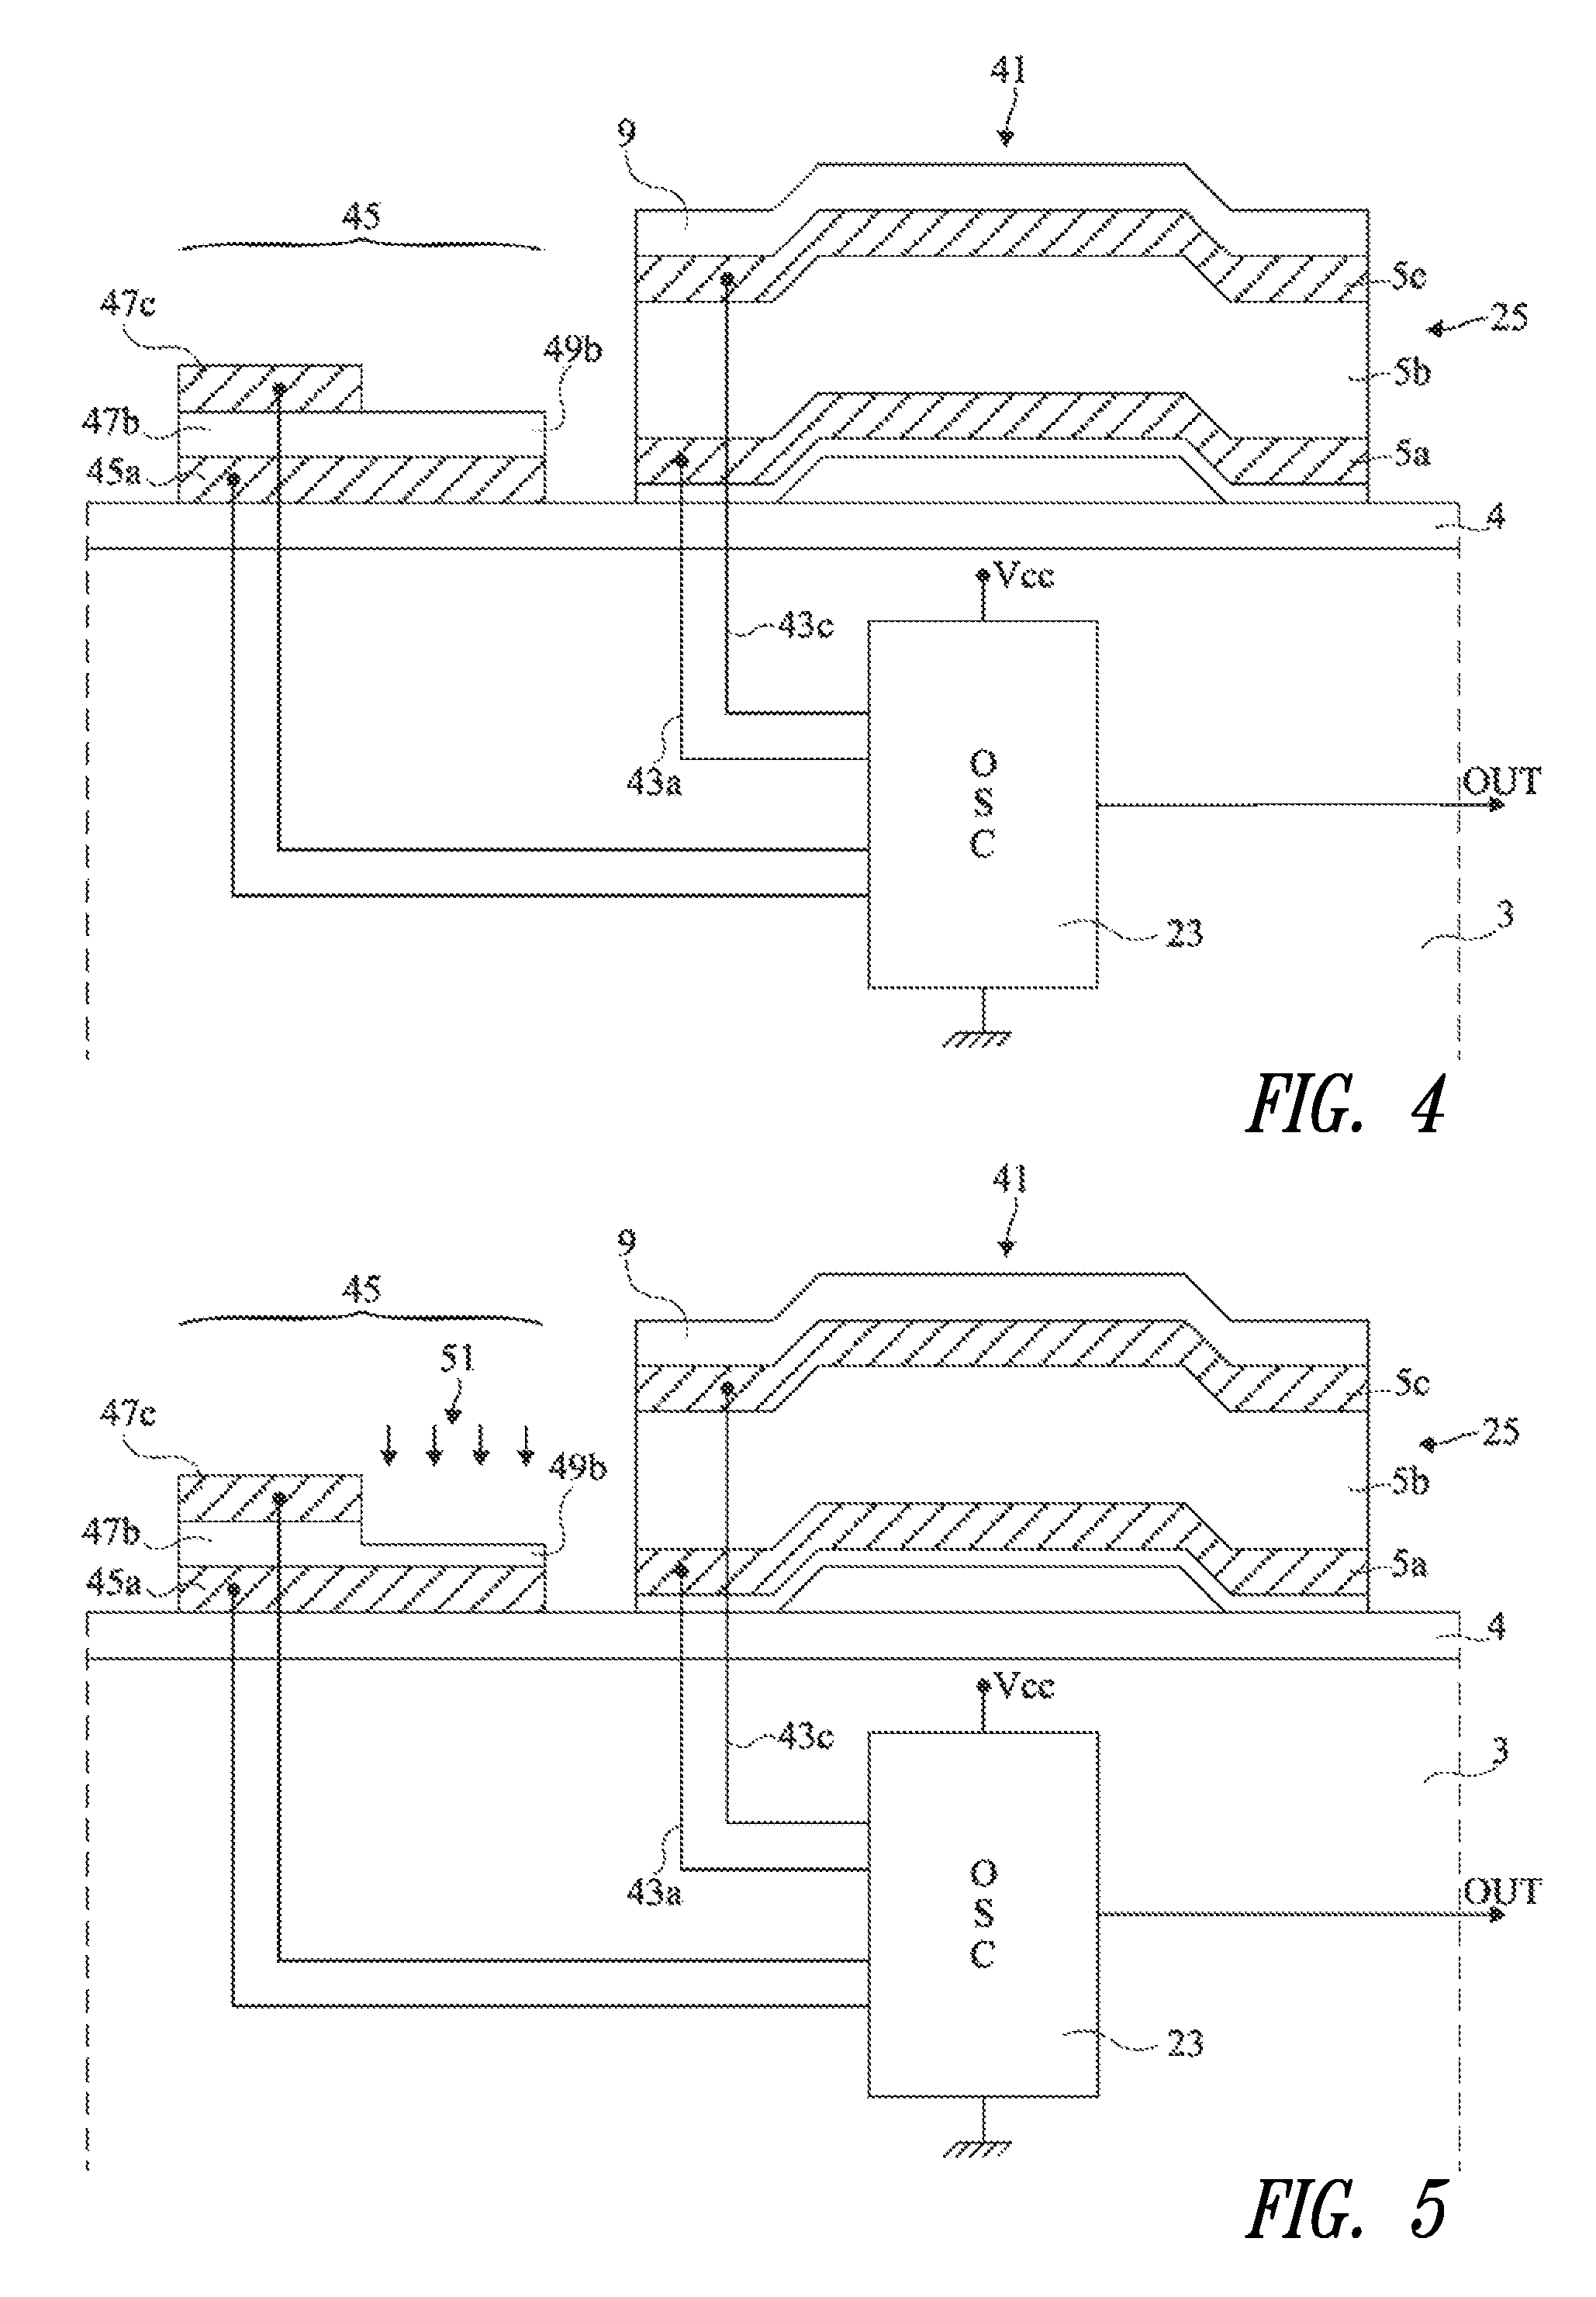 Method of adjustment on manufacturing of a circuit having a resonant element